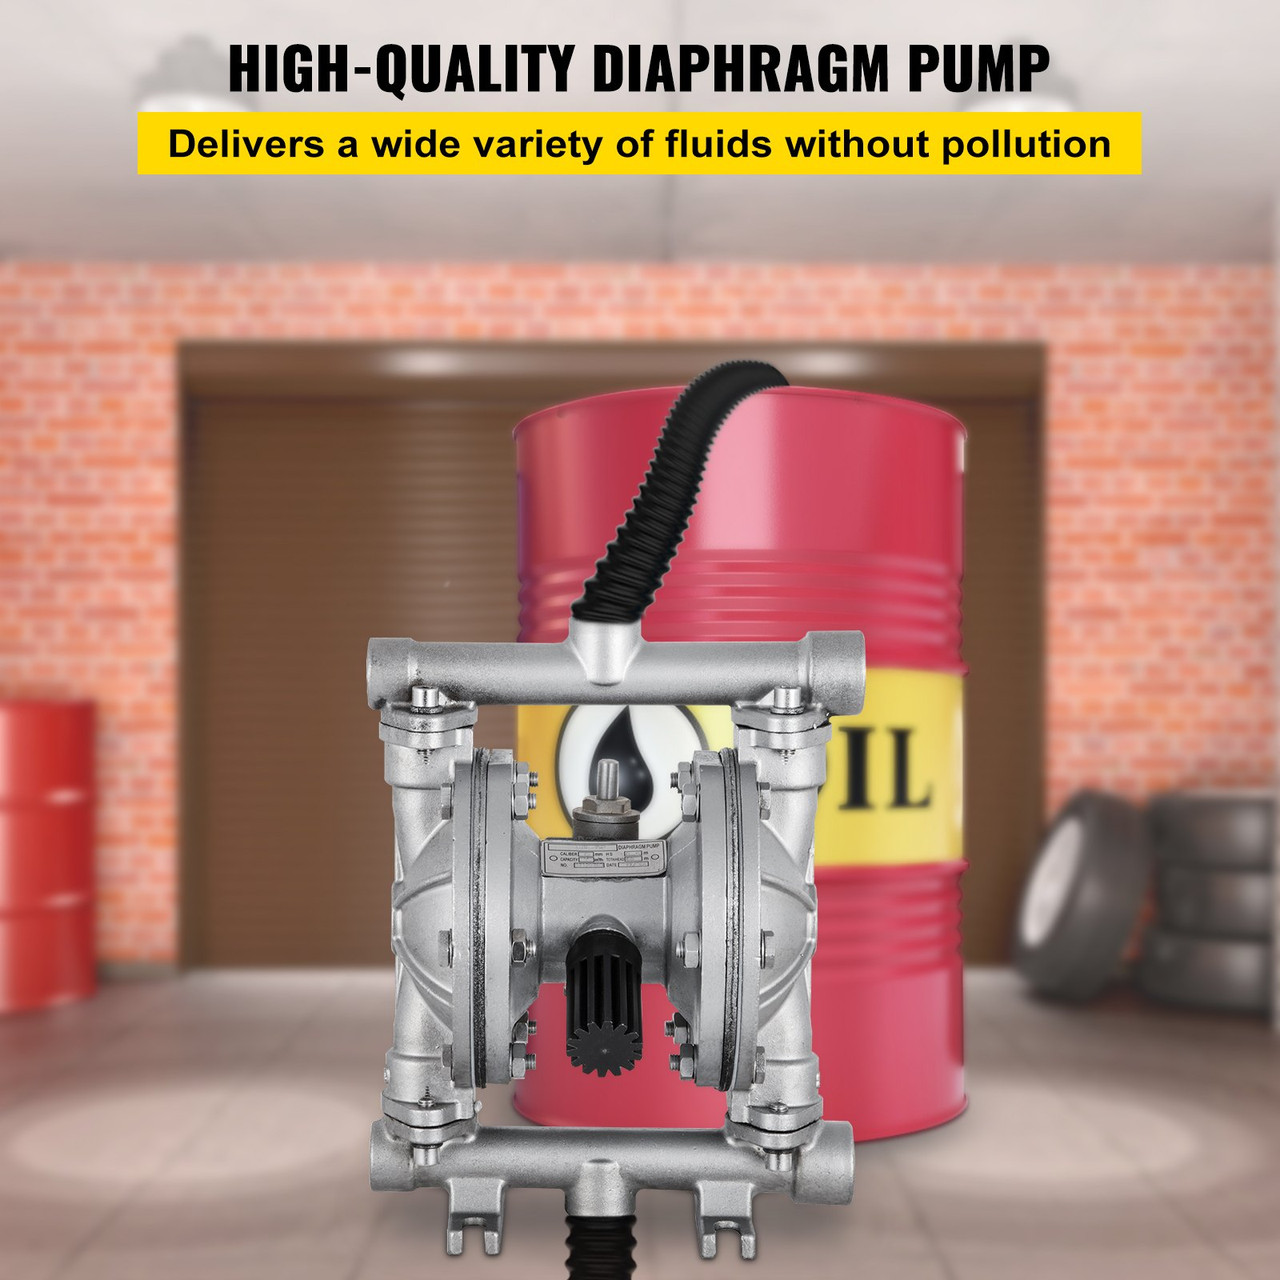 Air-Operated Double Diaphragm Pump, 1/2 in Inlet & Outlet, Stainless Steel Body, 8.8 GPM & Max 120PSI, PTFE Diaphragm Pneumatic Transfer Pump for Petroleum, Diesel, Oil & Low Viscosity Fluids